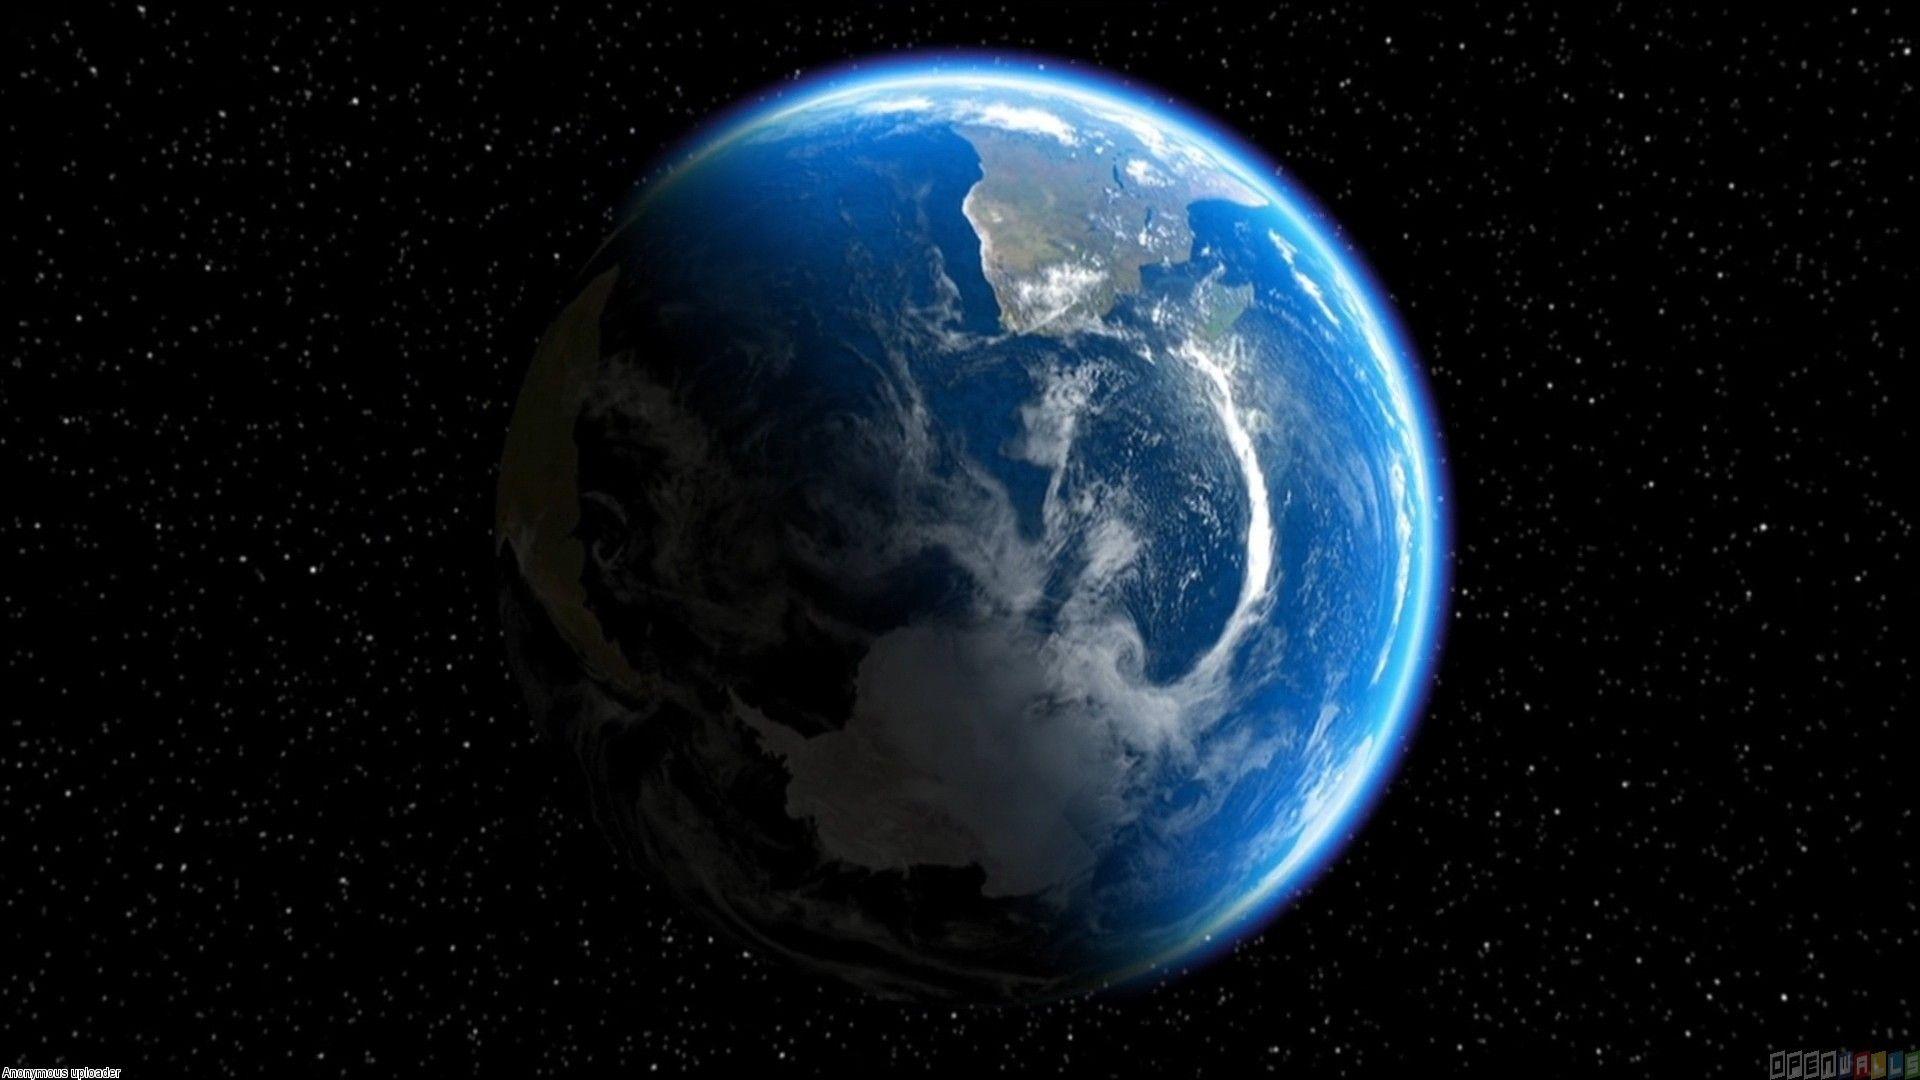 Adorable Planet Earth Picture, Planet Earth Wallpaper 34